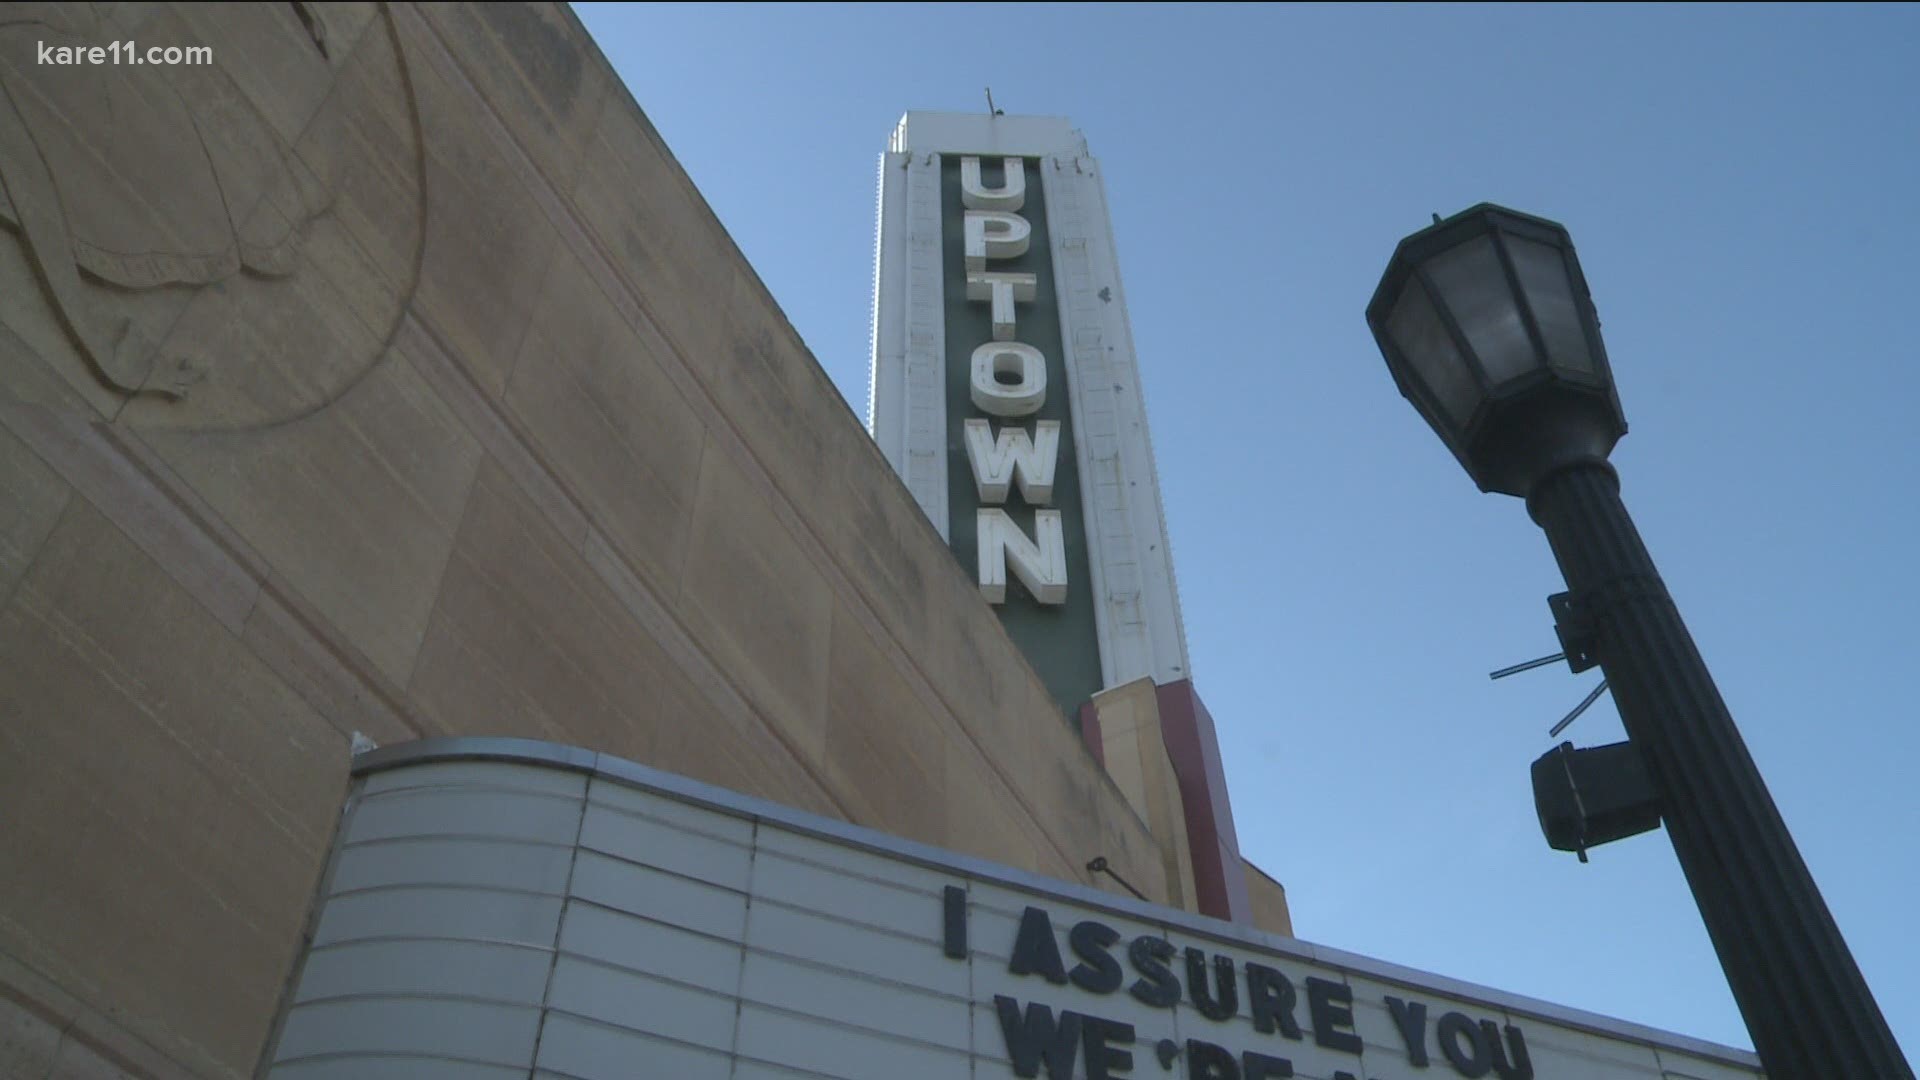 The company has been renting out the theatre for a decades, but they're being forced out after allegedly not paying rent during the pandemic.